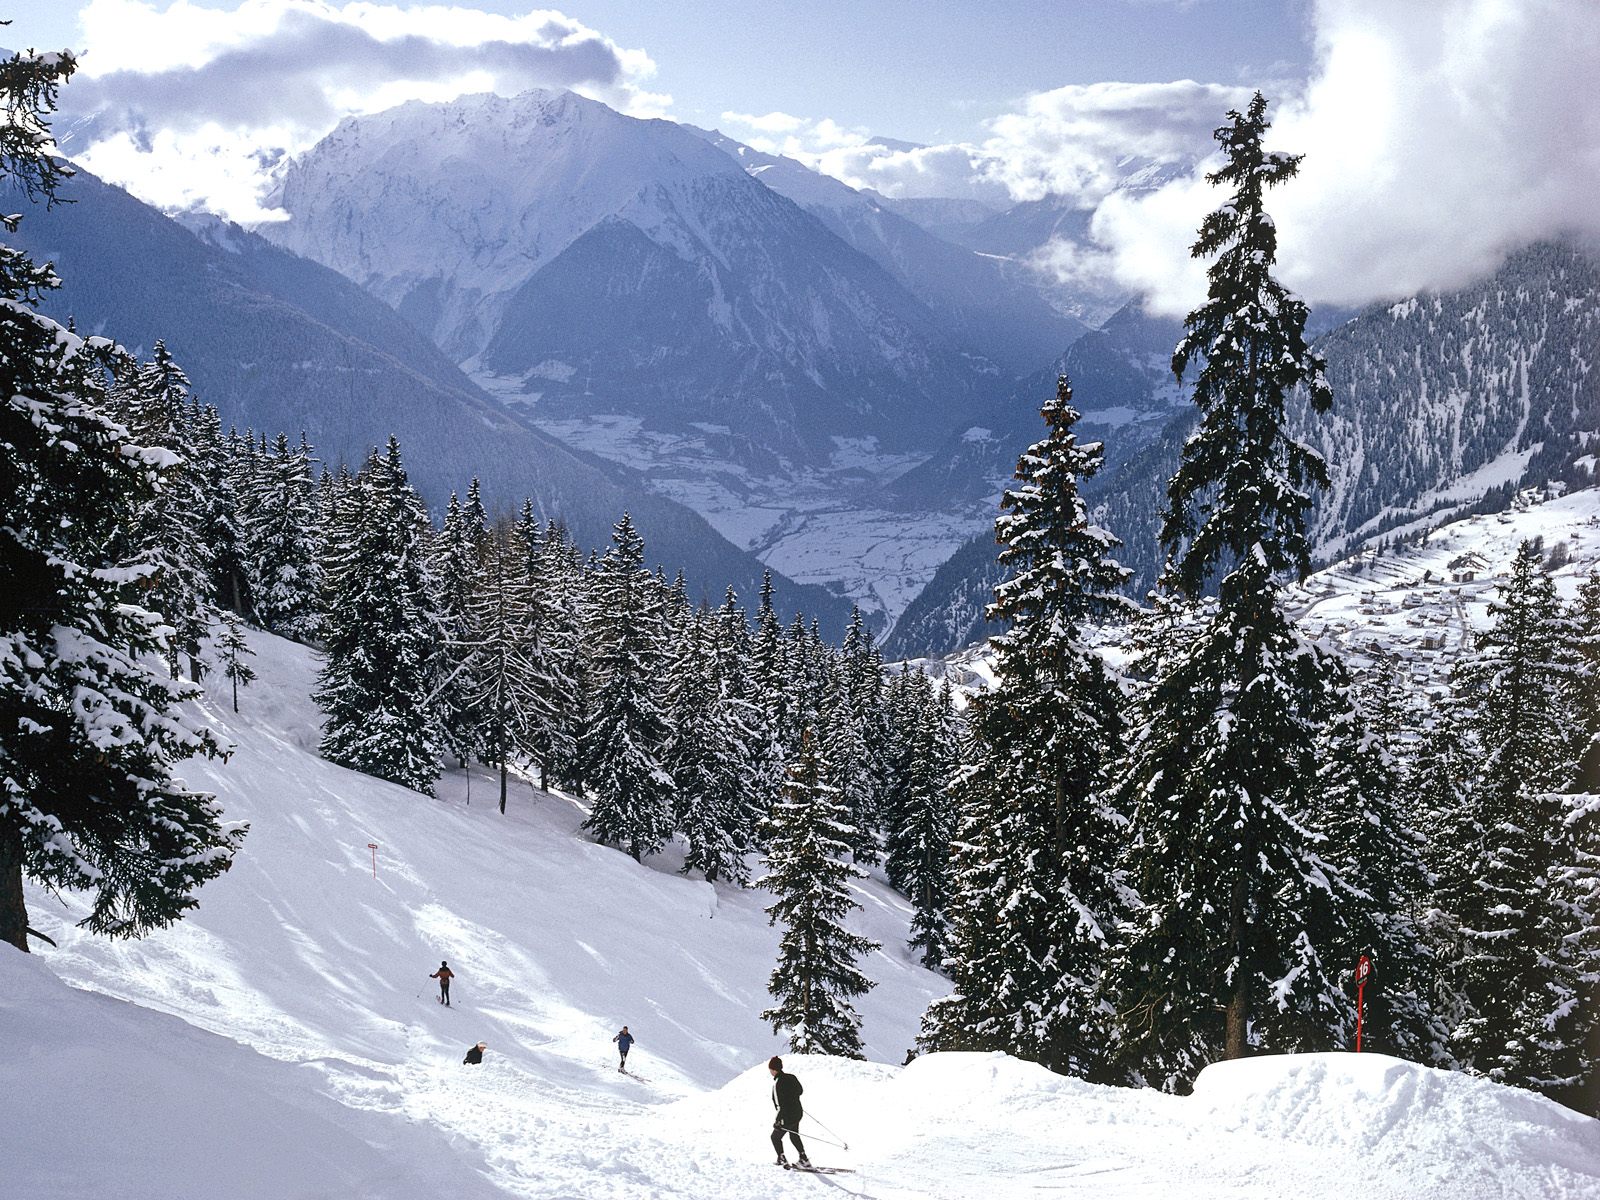 Skiing Swiss Alps wallpapers and images   wallpapers pictures photos